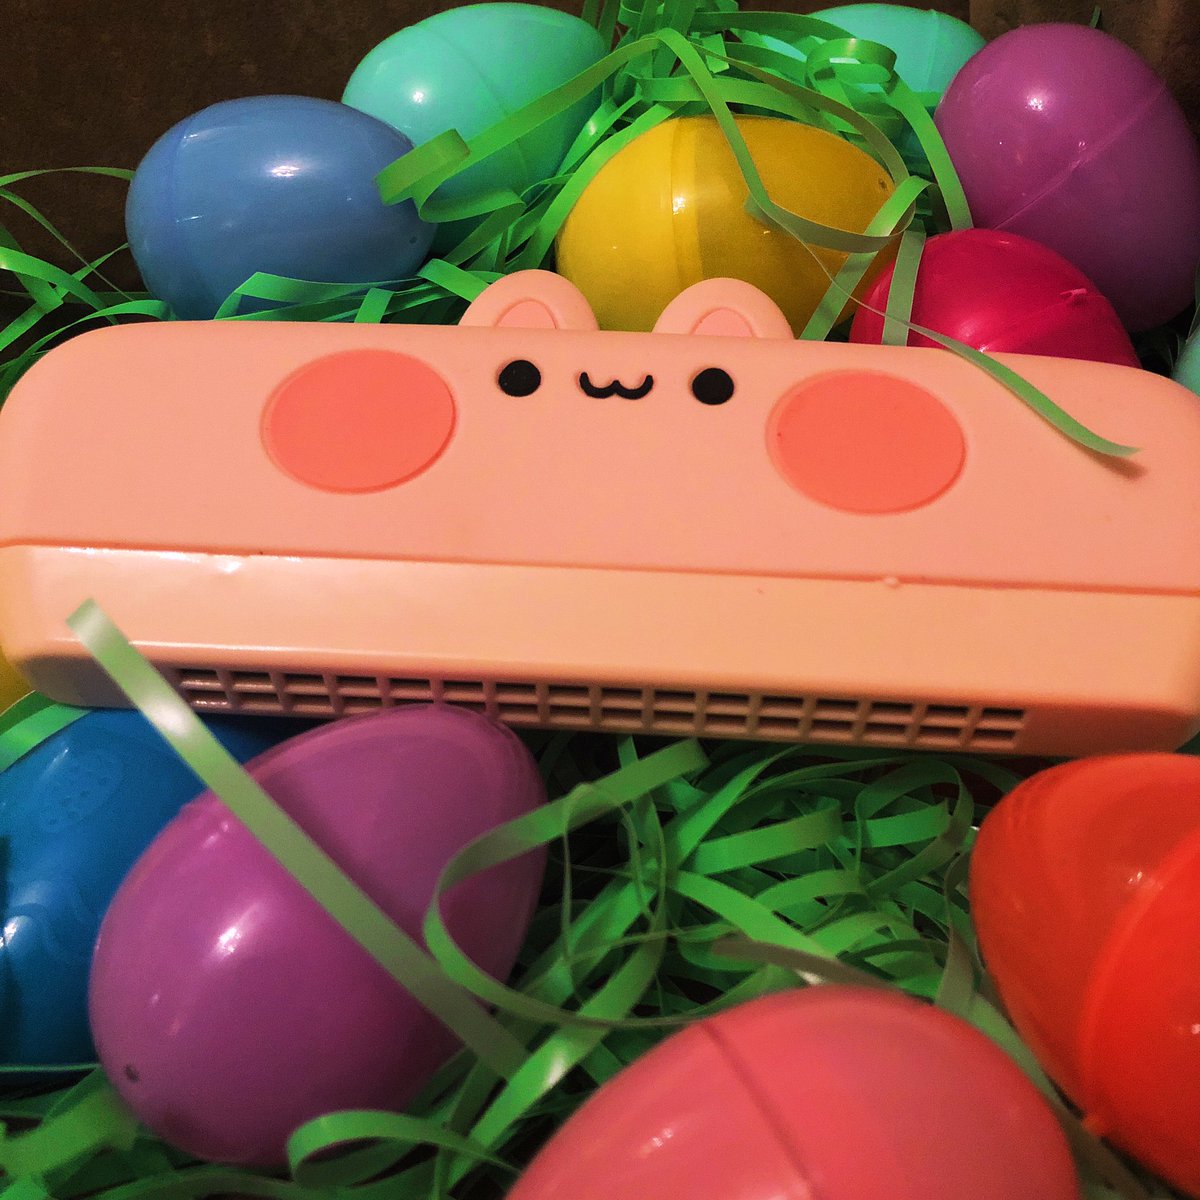 Happy Easter from the Garden State Harmonica Club! Join us at our next in-person meeting on Monday, April 8, 2024 in Glen Rock, NJ. 
#harmonica #harmonicaplayer #harmonicablues #harmonicas #bluesharmonica #harmonicaclub #gardenstateharmonicaclub #newjersey #easter